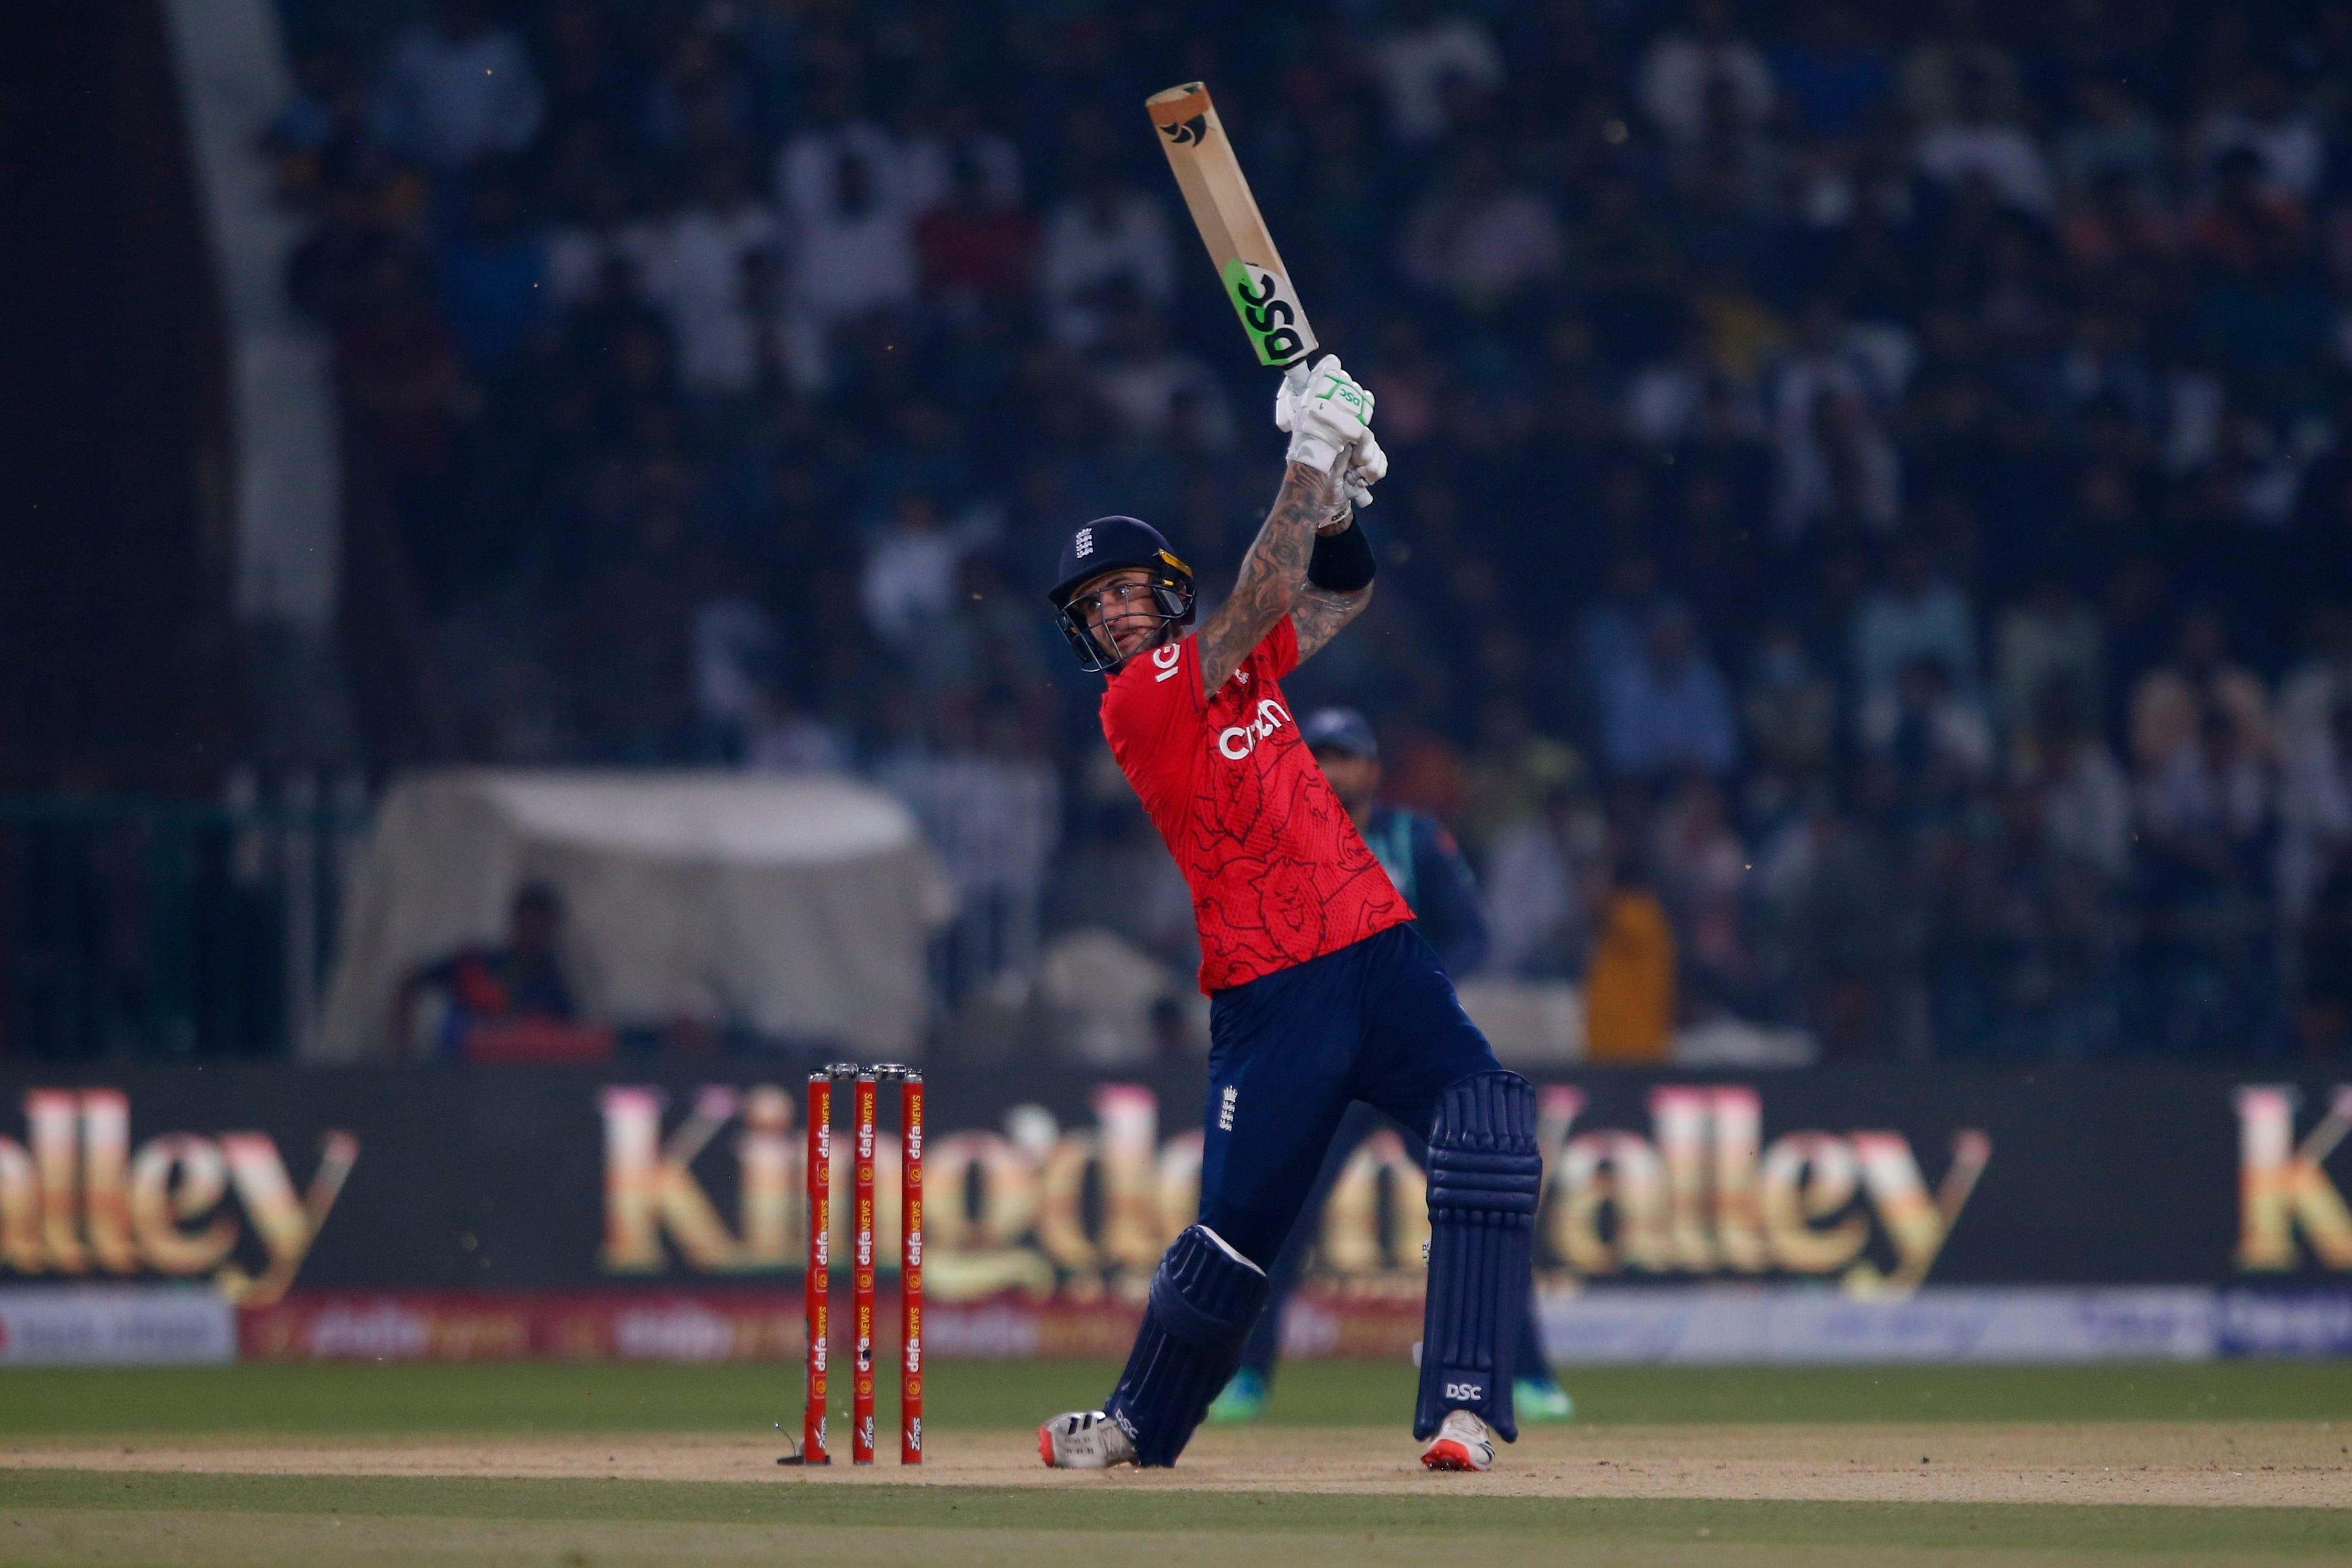 Alex Hales, pictured, looks set to partner Jos Buttler at the T20 World Cup (K.M. Chaudary/AP)